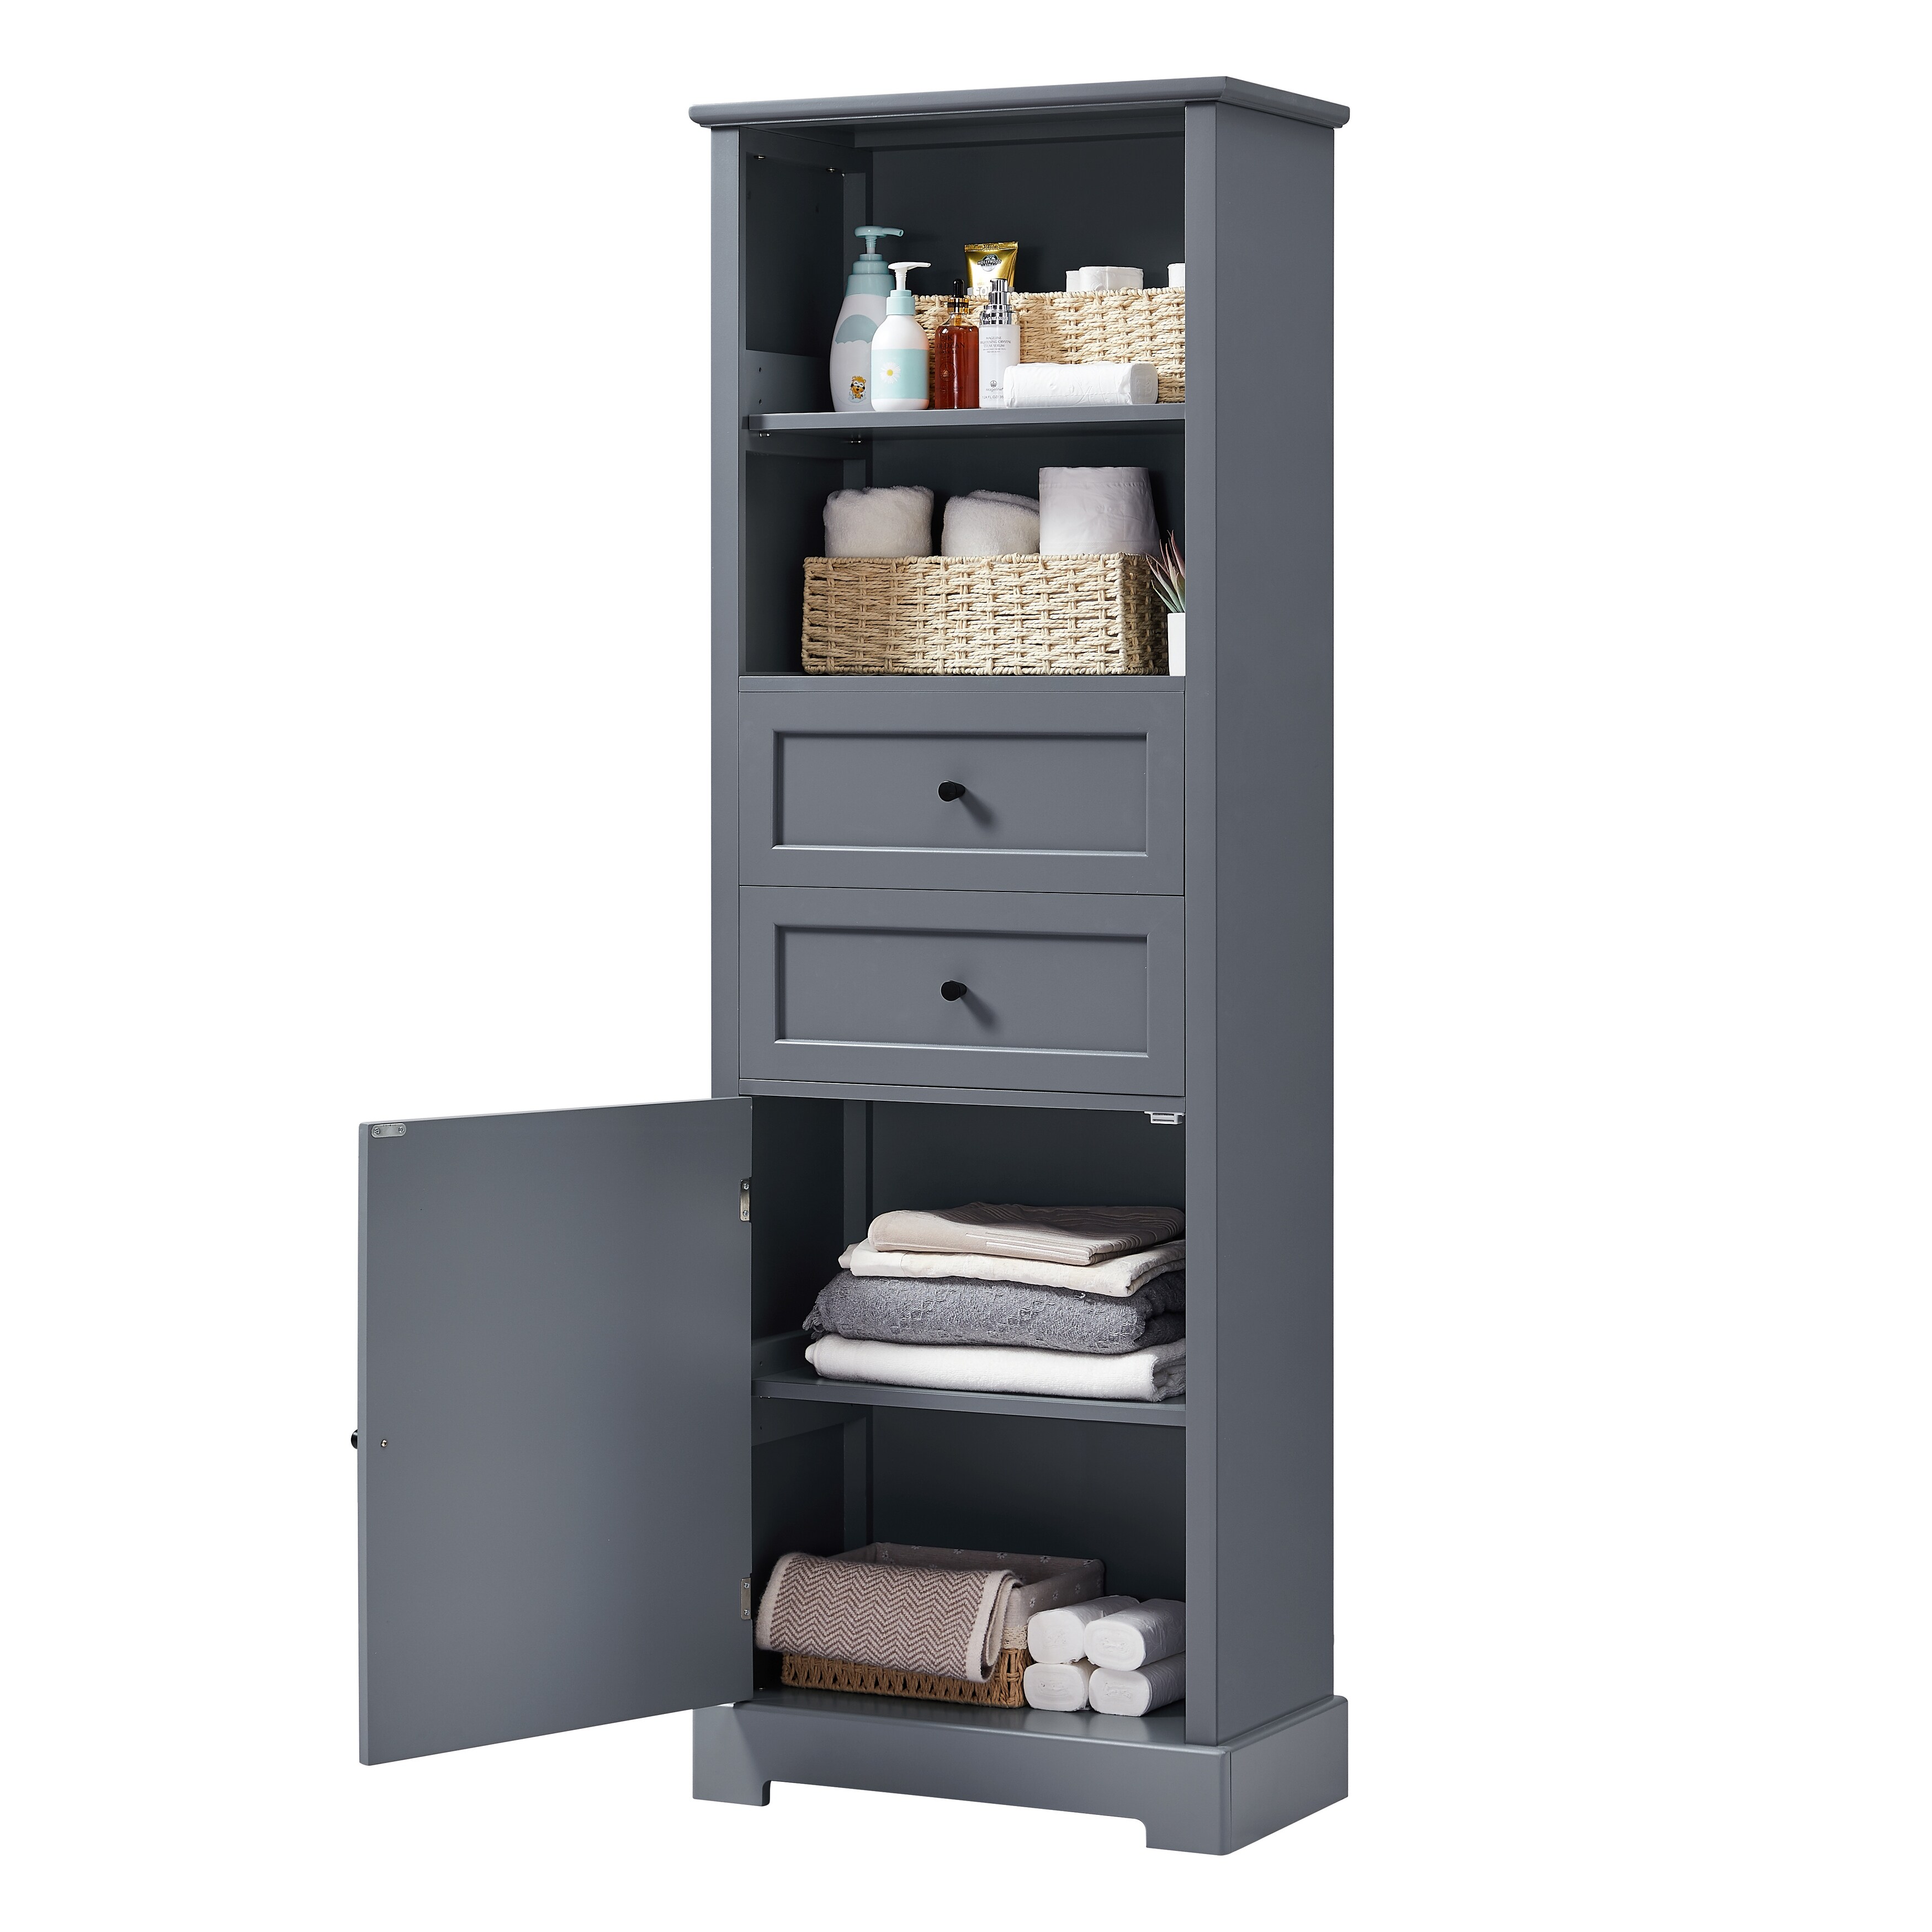 https://ak1.ostkcdn.com/images/products/is/images/direct/584dd6a113c276c1eebd99898179f165887c8292/Tall-Bathroom-Storage-Cabinet%2C-Narrow-Freestanding-Bathroom-Cabinet-with-Two-Drawers%2C-Open-Storage-and-Adjustable-Shelf.jpg